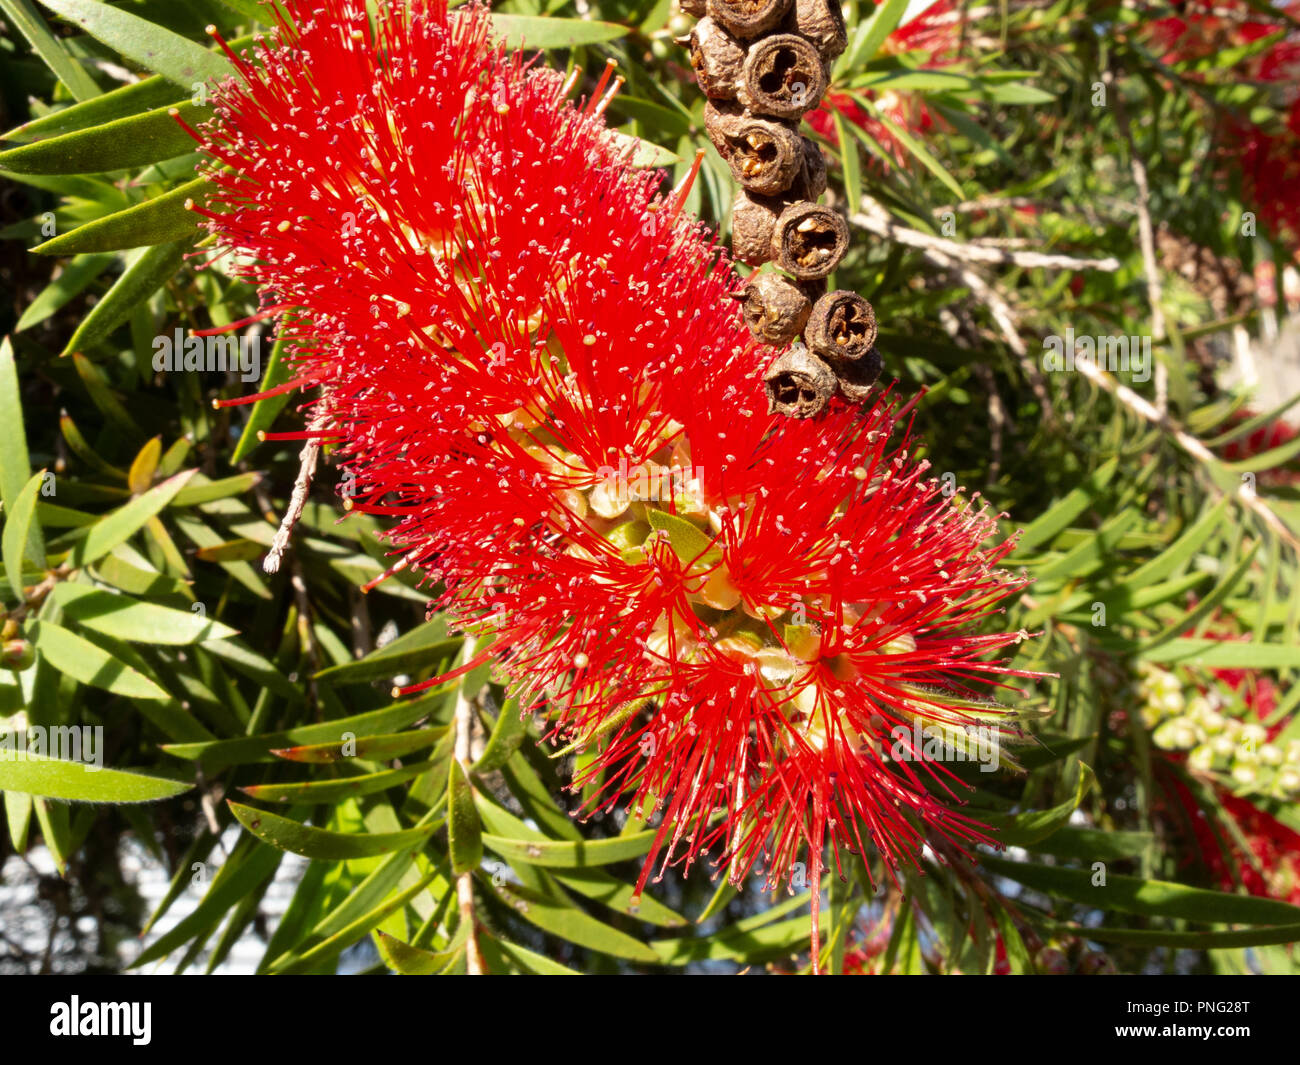 Asuncion, Paraguay. 21st Sep, 2018. A warm sunny day in Asuncion with temperatures high around 31°C as weeping bottlebrush (Melaleuca viminalis) flowers in bloom sign the arrival of spring season. The spring equinox takes place tomorrow in Paraguay. Credit: Andre M. Chang/ARDUOPRESS/Alamy Live News Stock Photo